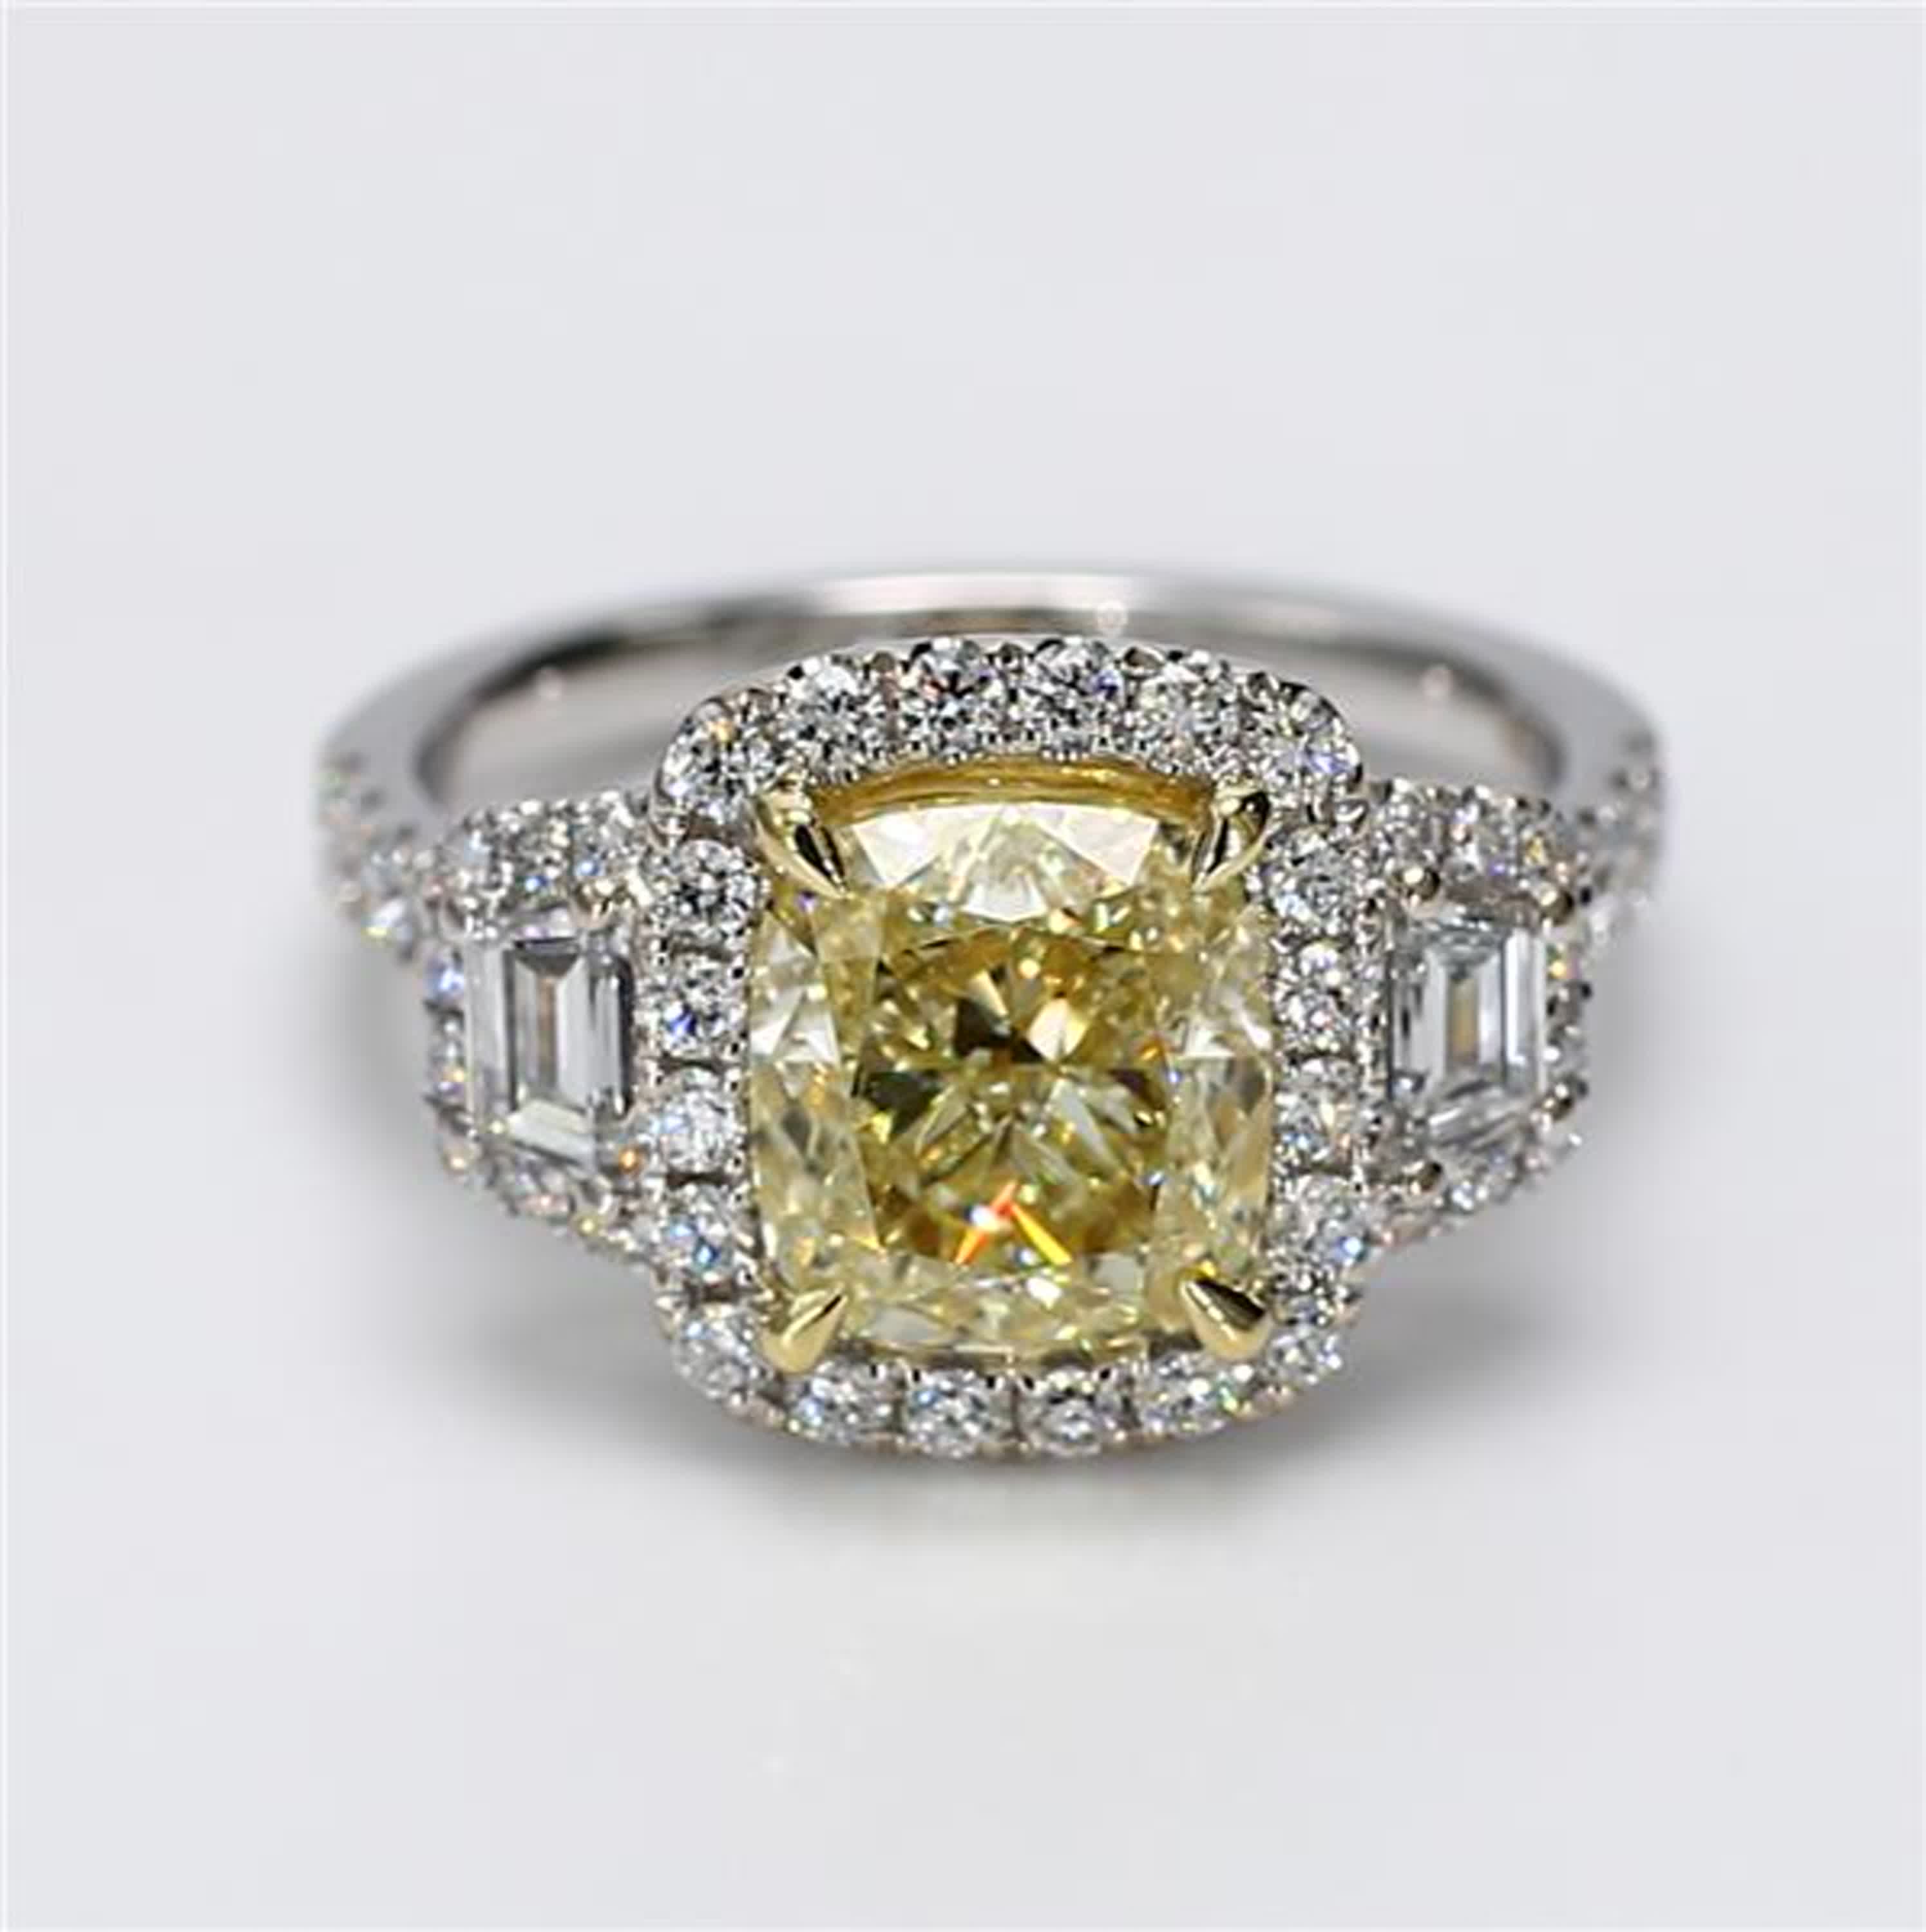 GIA Certified Natural Yellow Cushion and White Diamond 4.02 Carat TW Gold Ring